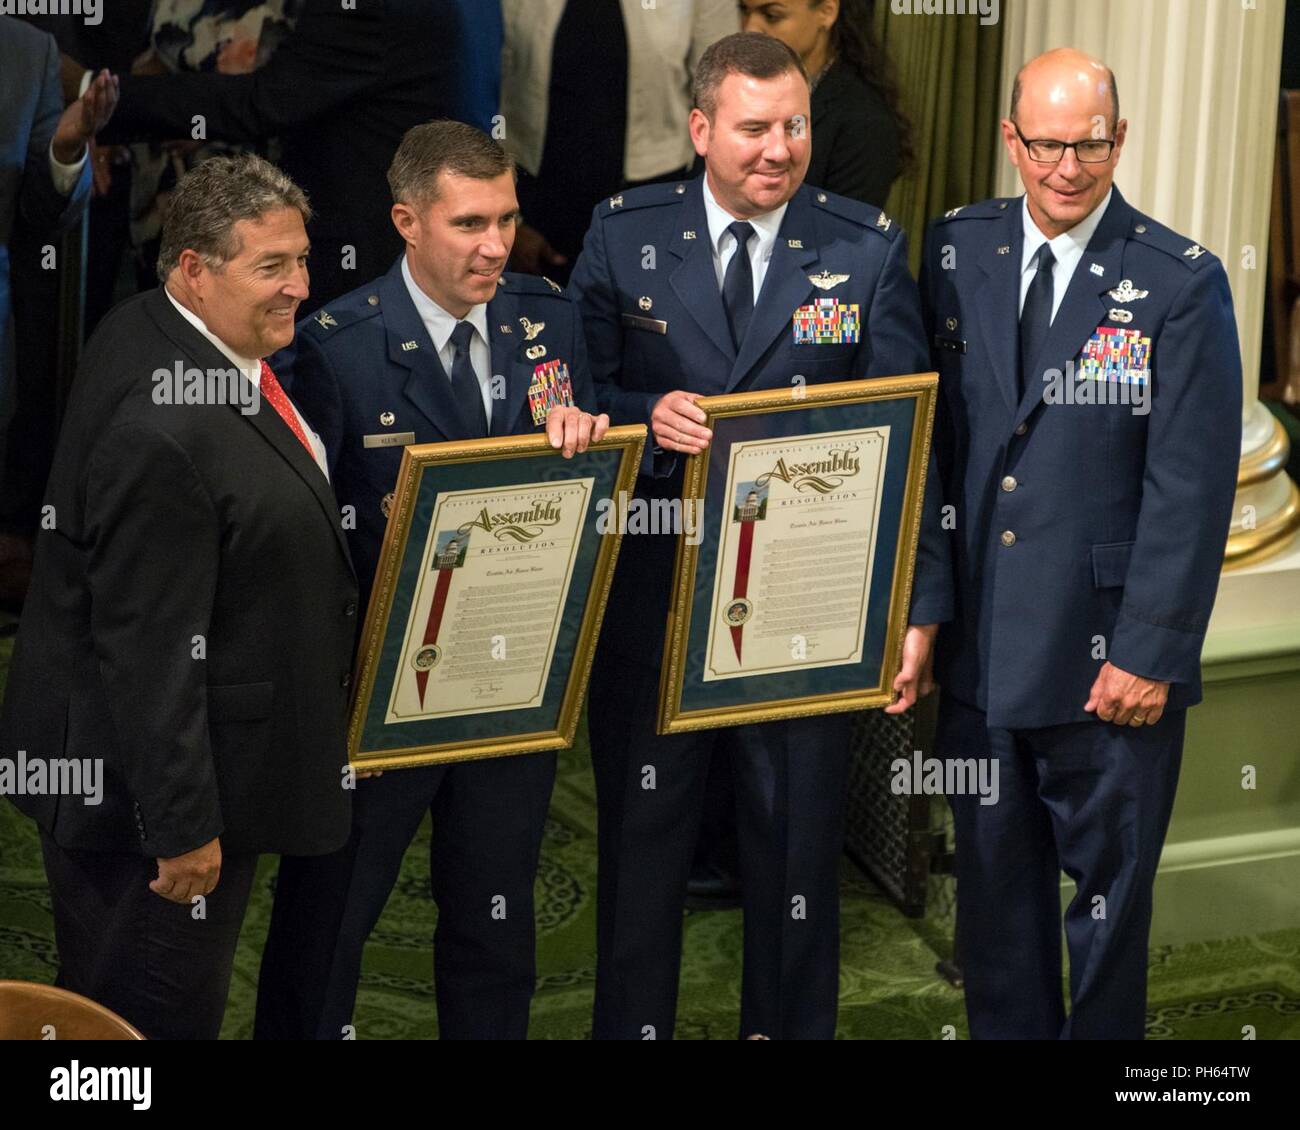 Assemblymember Jim Frazier presents Col. John Klein, 60th Air Mobility Wing commander, with a California State Assembly Resolution honoring the 75th Anniversary of Travis Air Force Base at the California State Capitol, Sacramento, June 25, 2018.  For the past 75 years, Travis AFB has been a focal point for the world as a power projection platform, a means to deliver hope, and a mission fueled by community support. Stock Photo